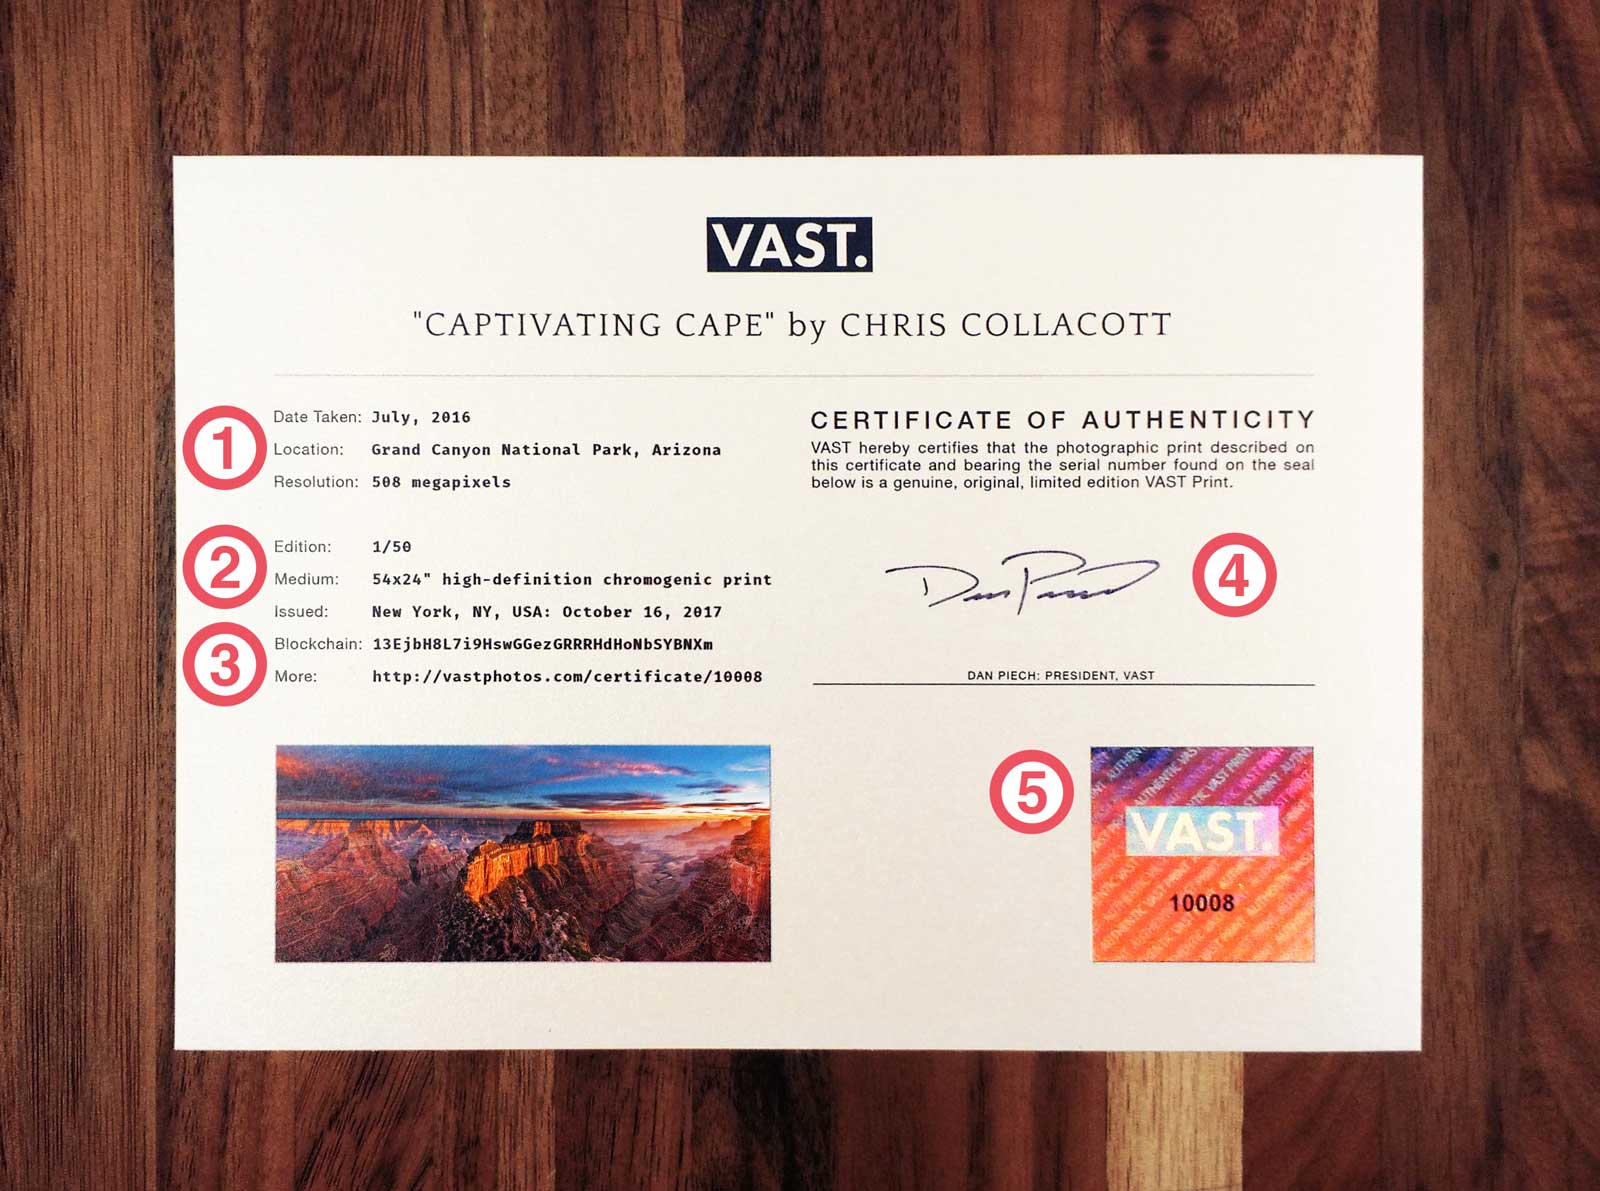 A VAST Certificate of Authenticity